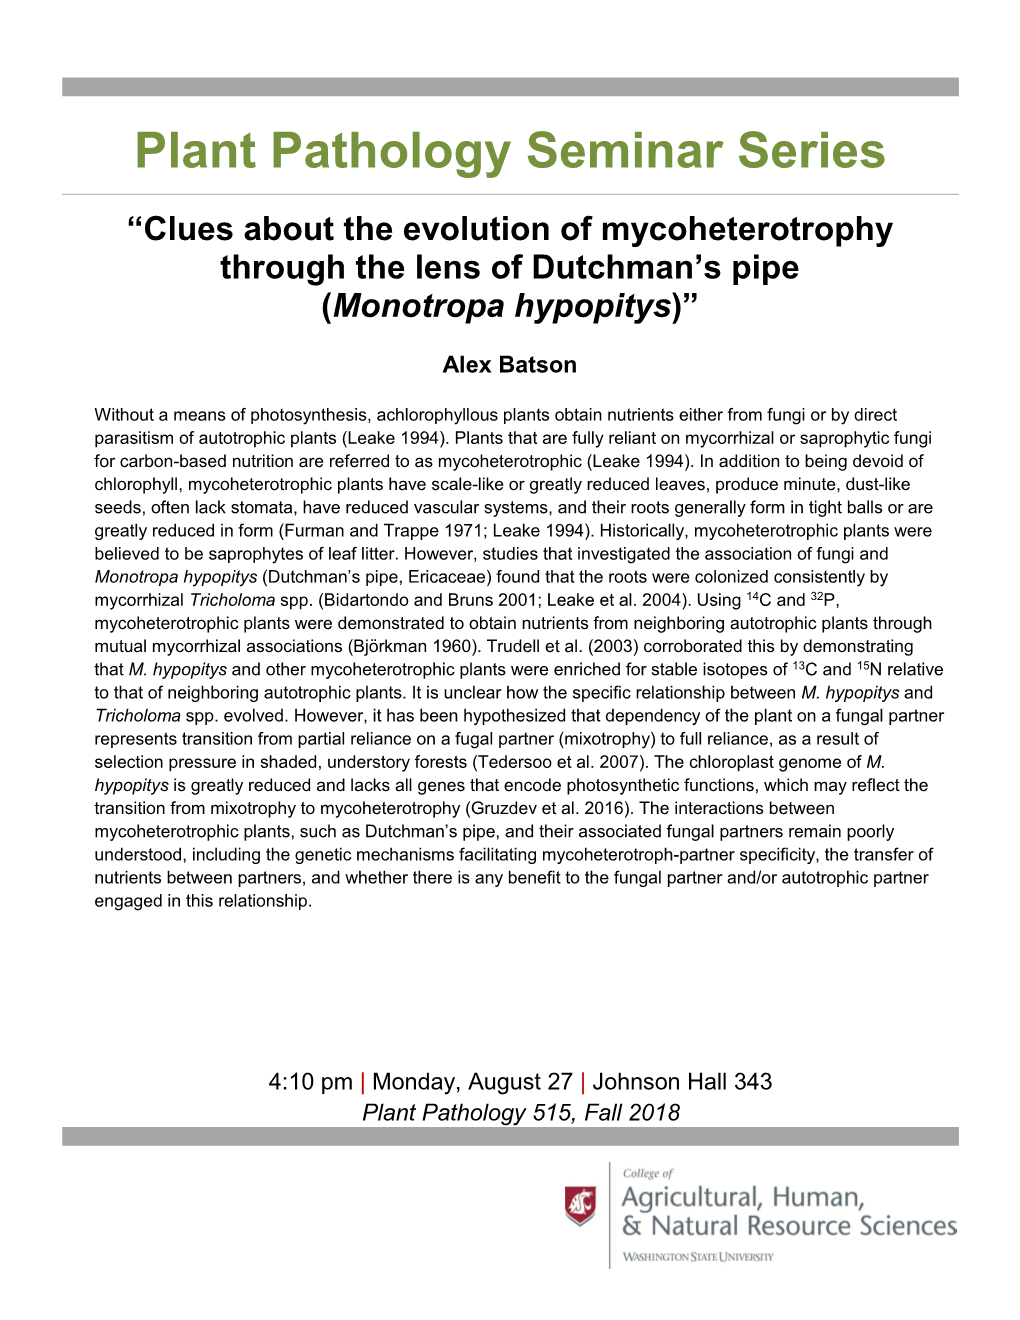 Plant Pathology Seminar Series “Clues About the Evolution of Mycoheterotrophy Through the Lens of Dutchman’S Pipe (Monotropa Hypopitys)”